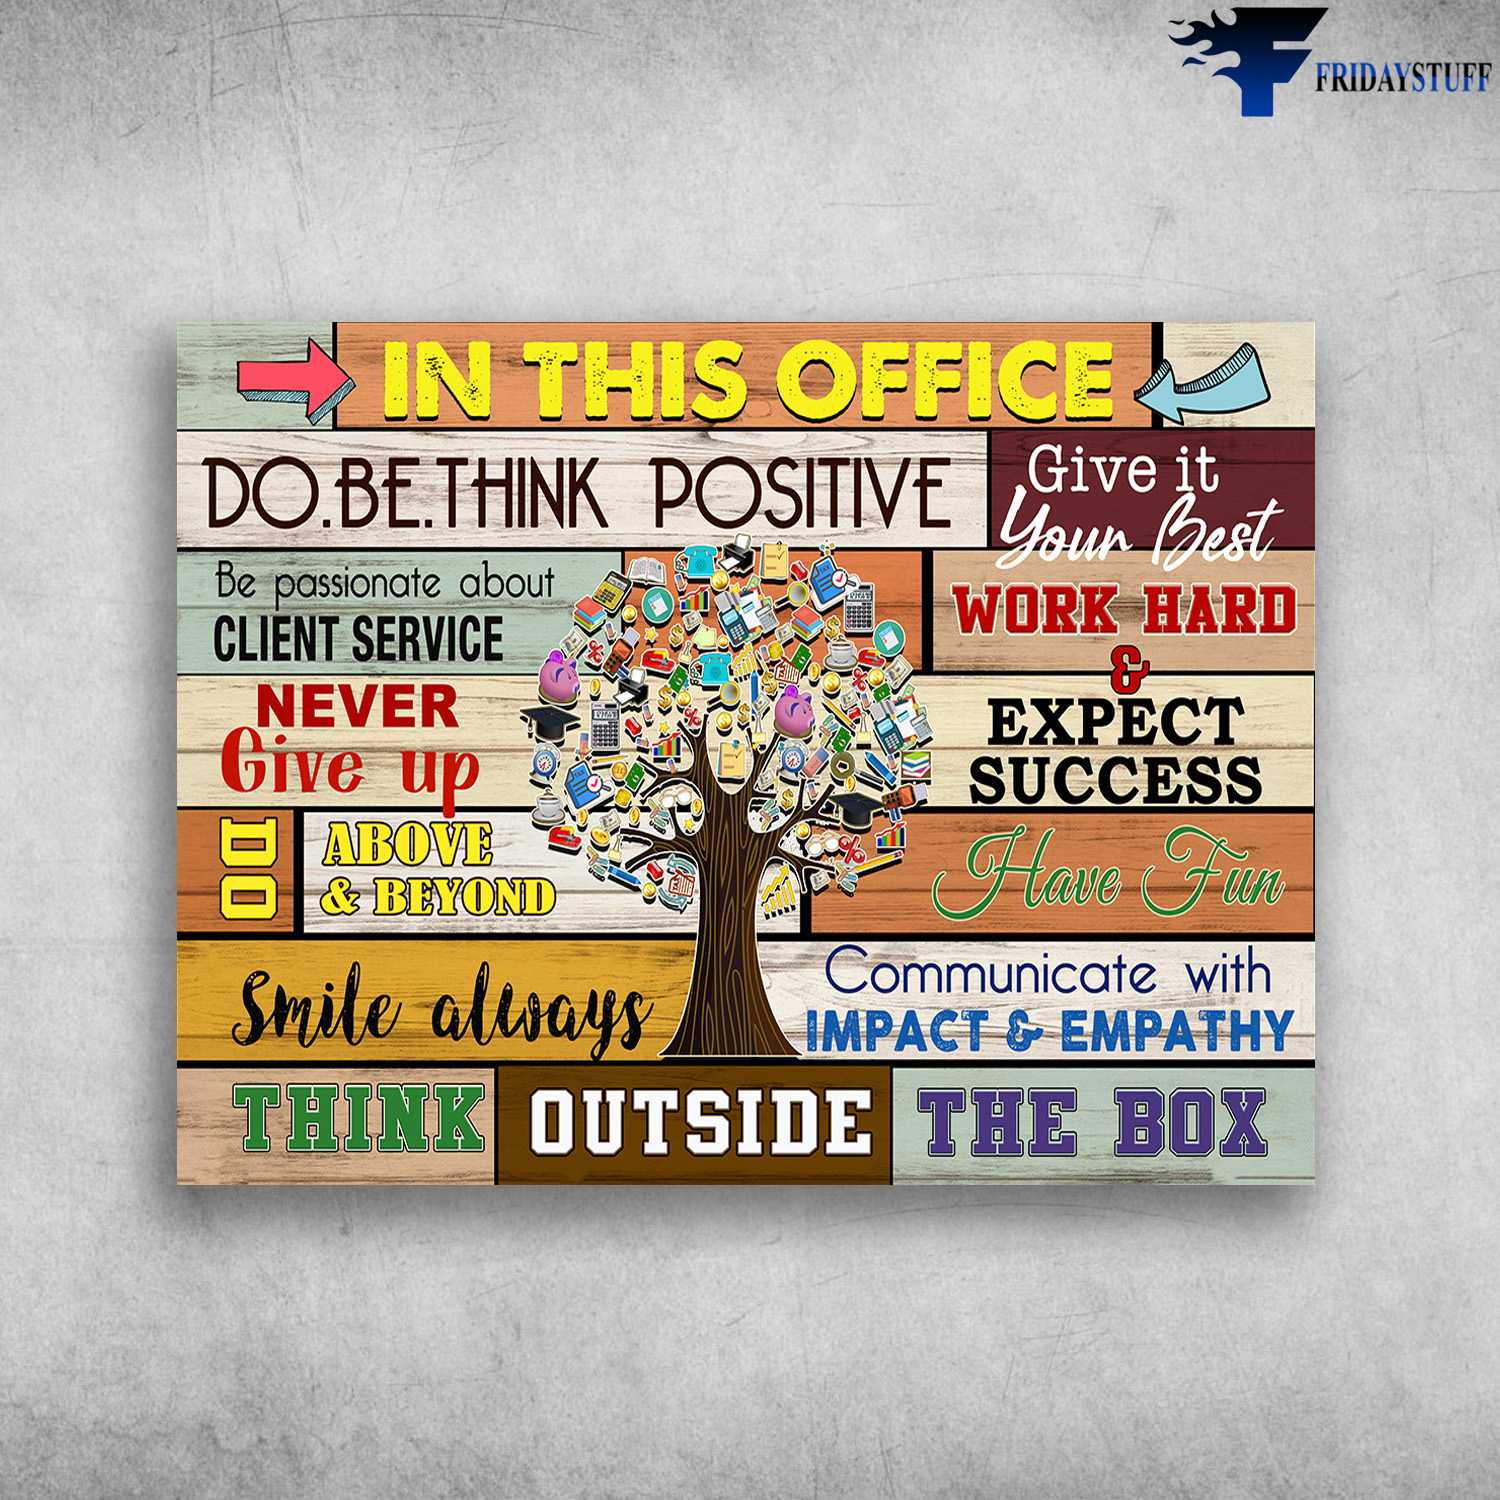 Office Poster, In This Office, Do Be Think Positive, Give It Your Best, Be Possionate About Client Service, Never Give Up